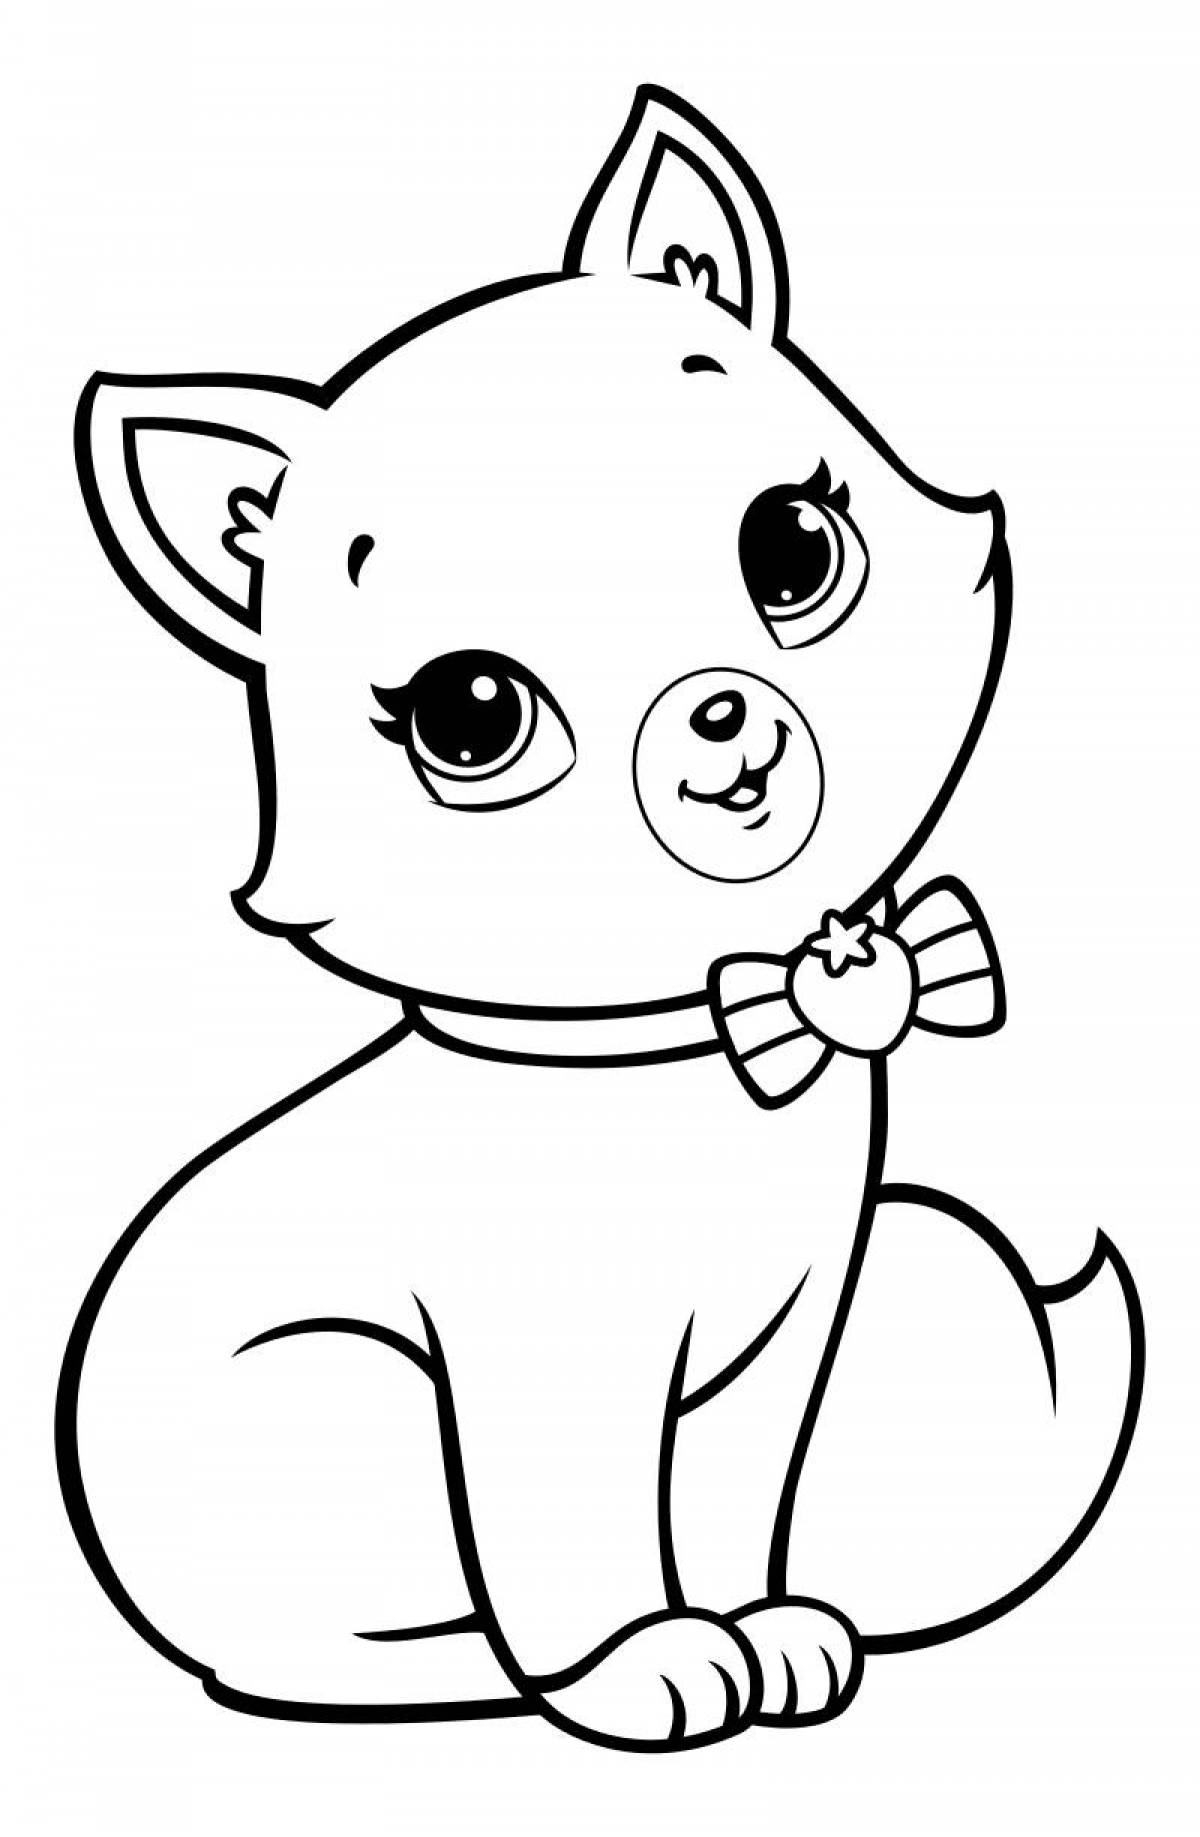 Magic dog and cat coloring page